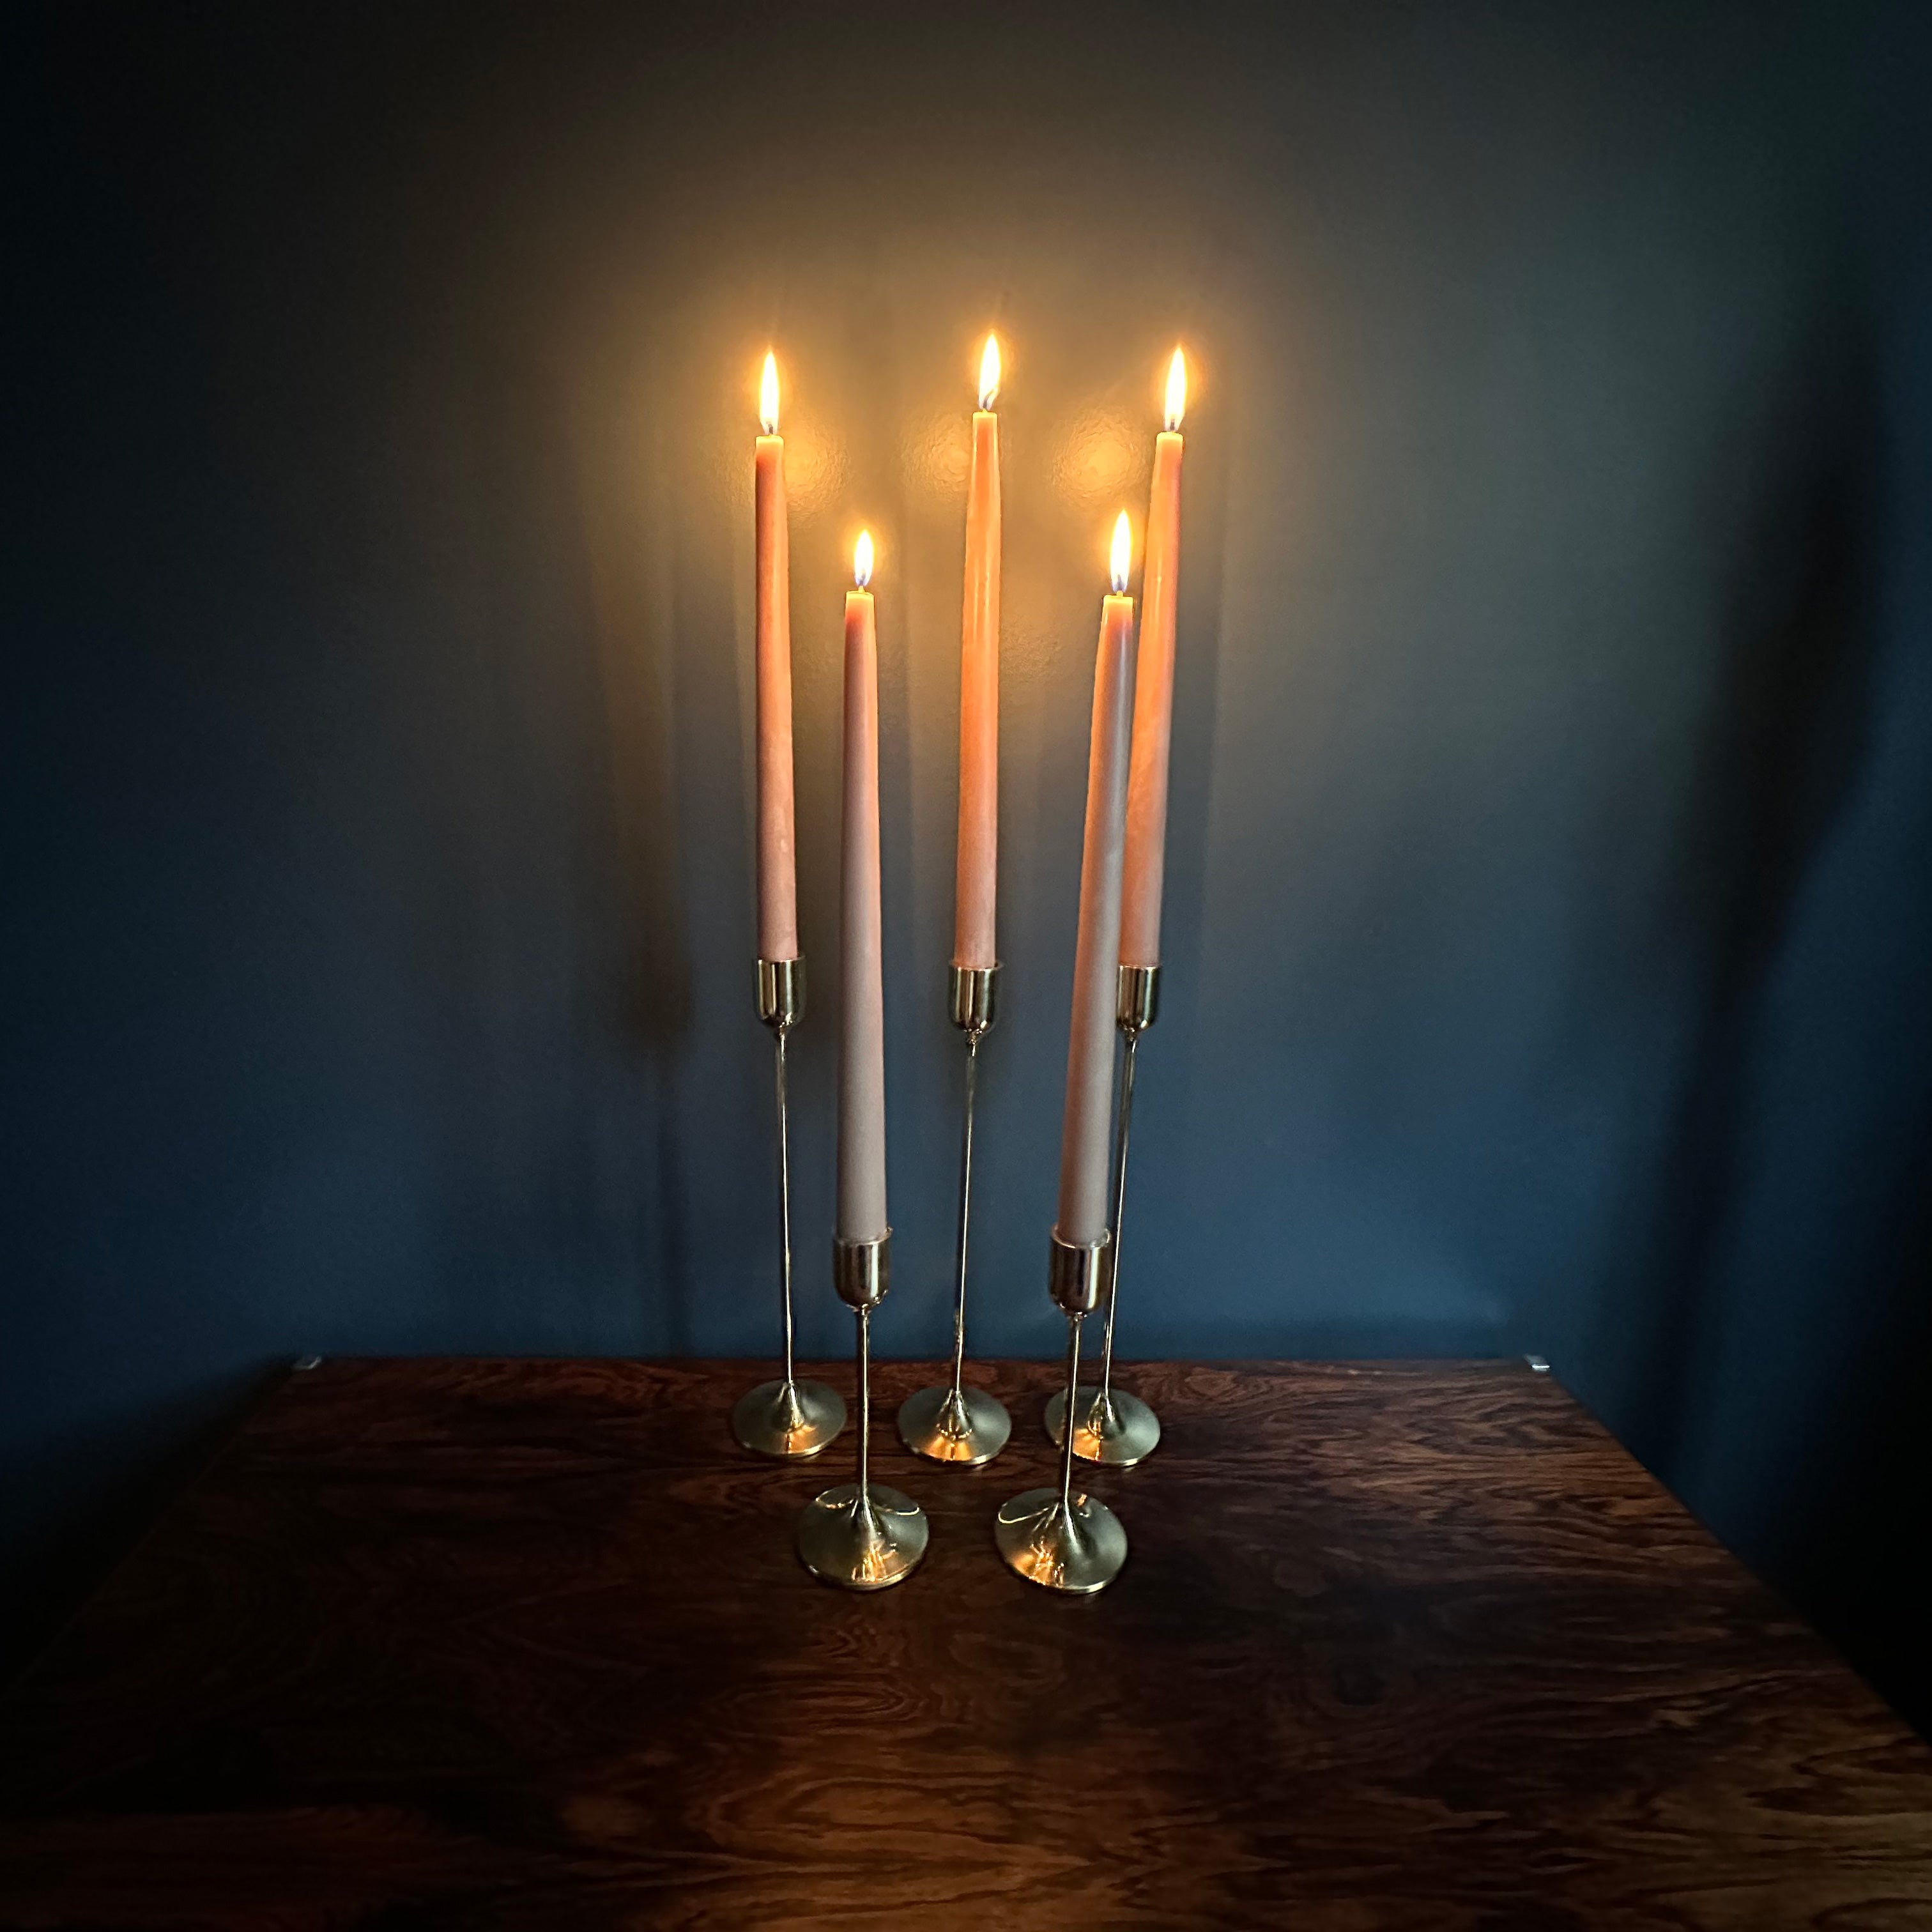 Image of 5 M+A NYC Solid Brass Taper Stands (3 Tall and 2 Small) with lit candles sitting atop a rosewood table against a blue green backdrop.